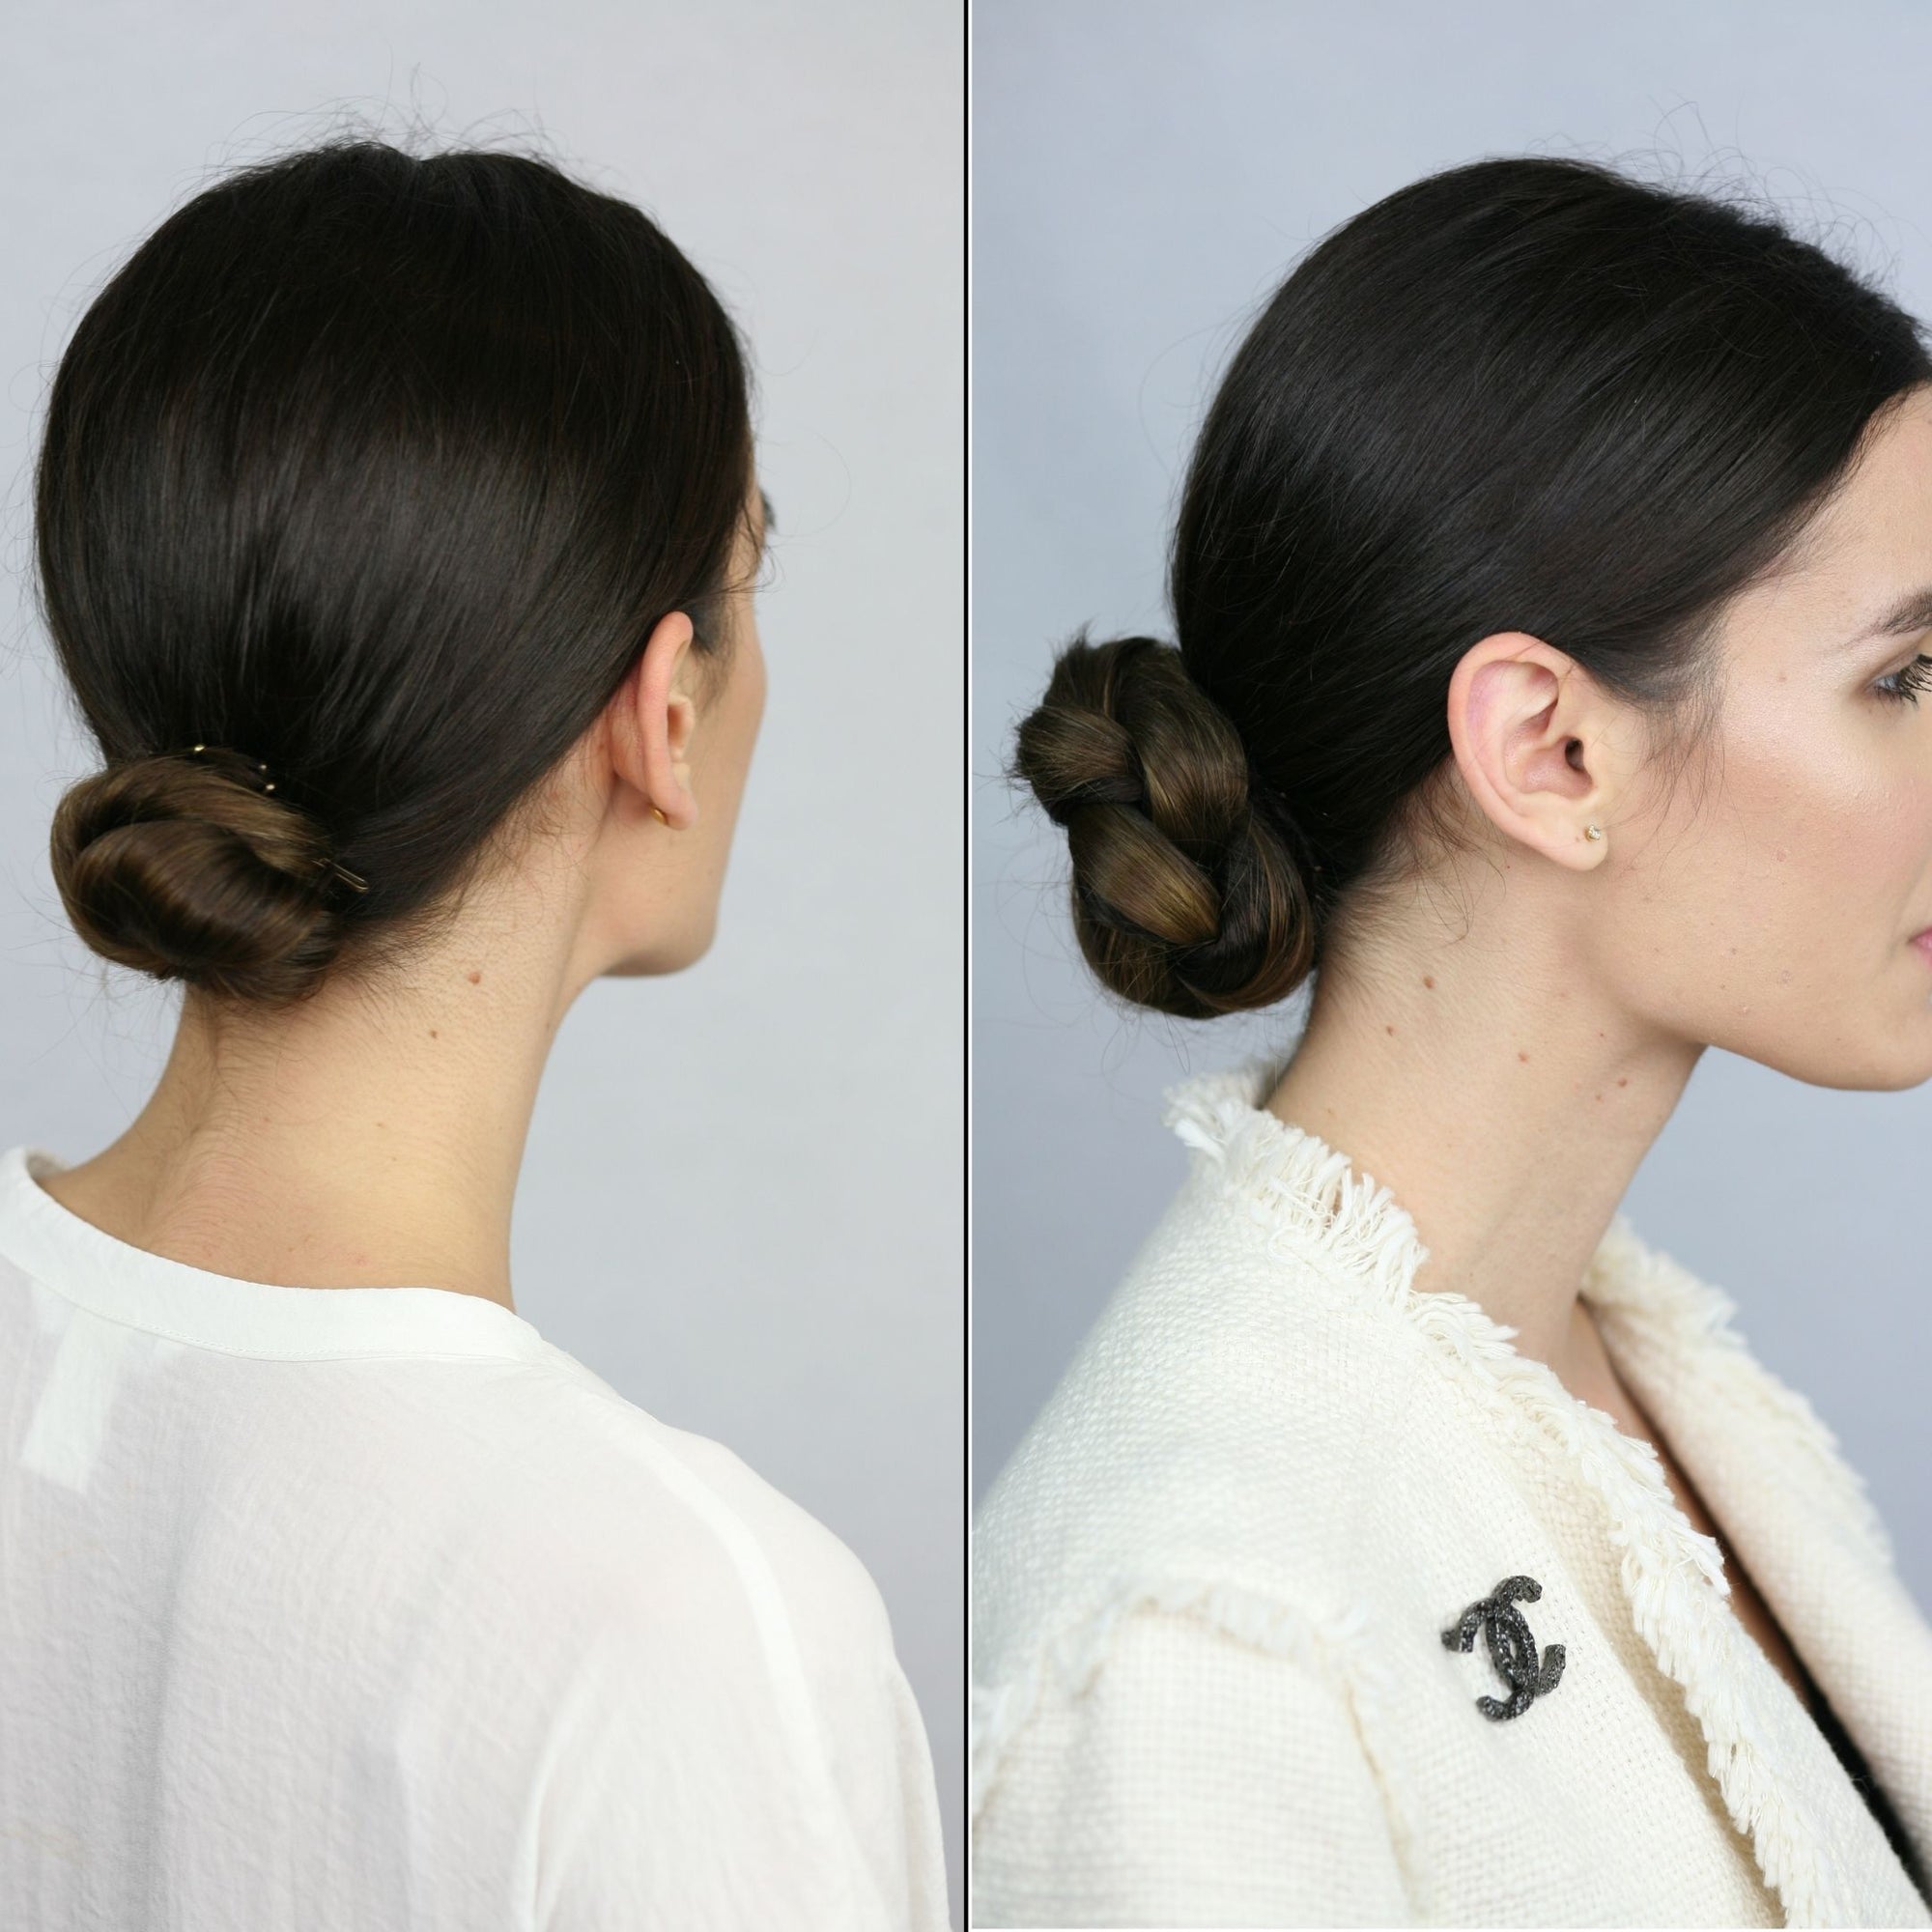 Low Bun Before & After Easy Updo Extensions